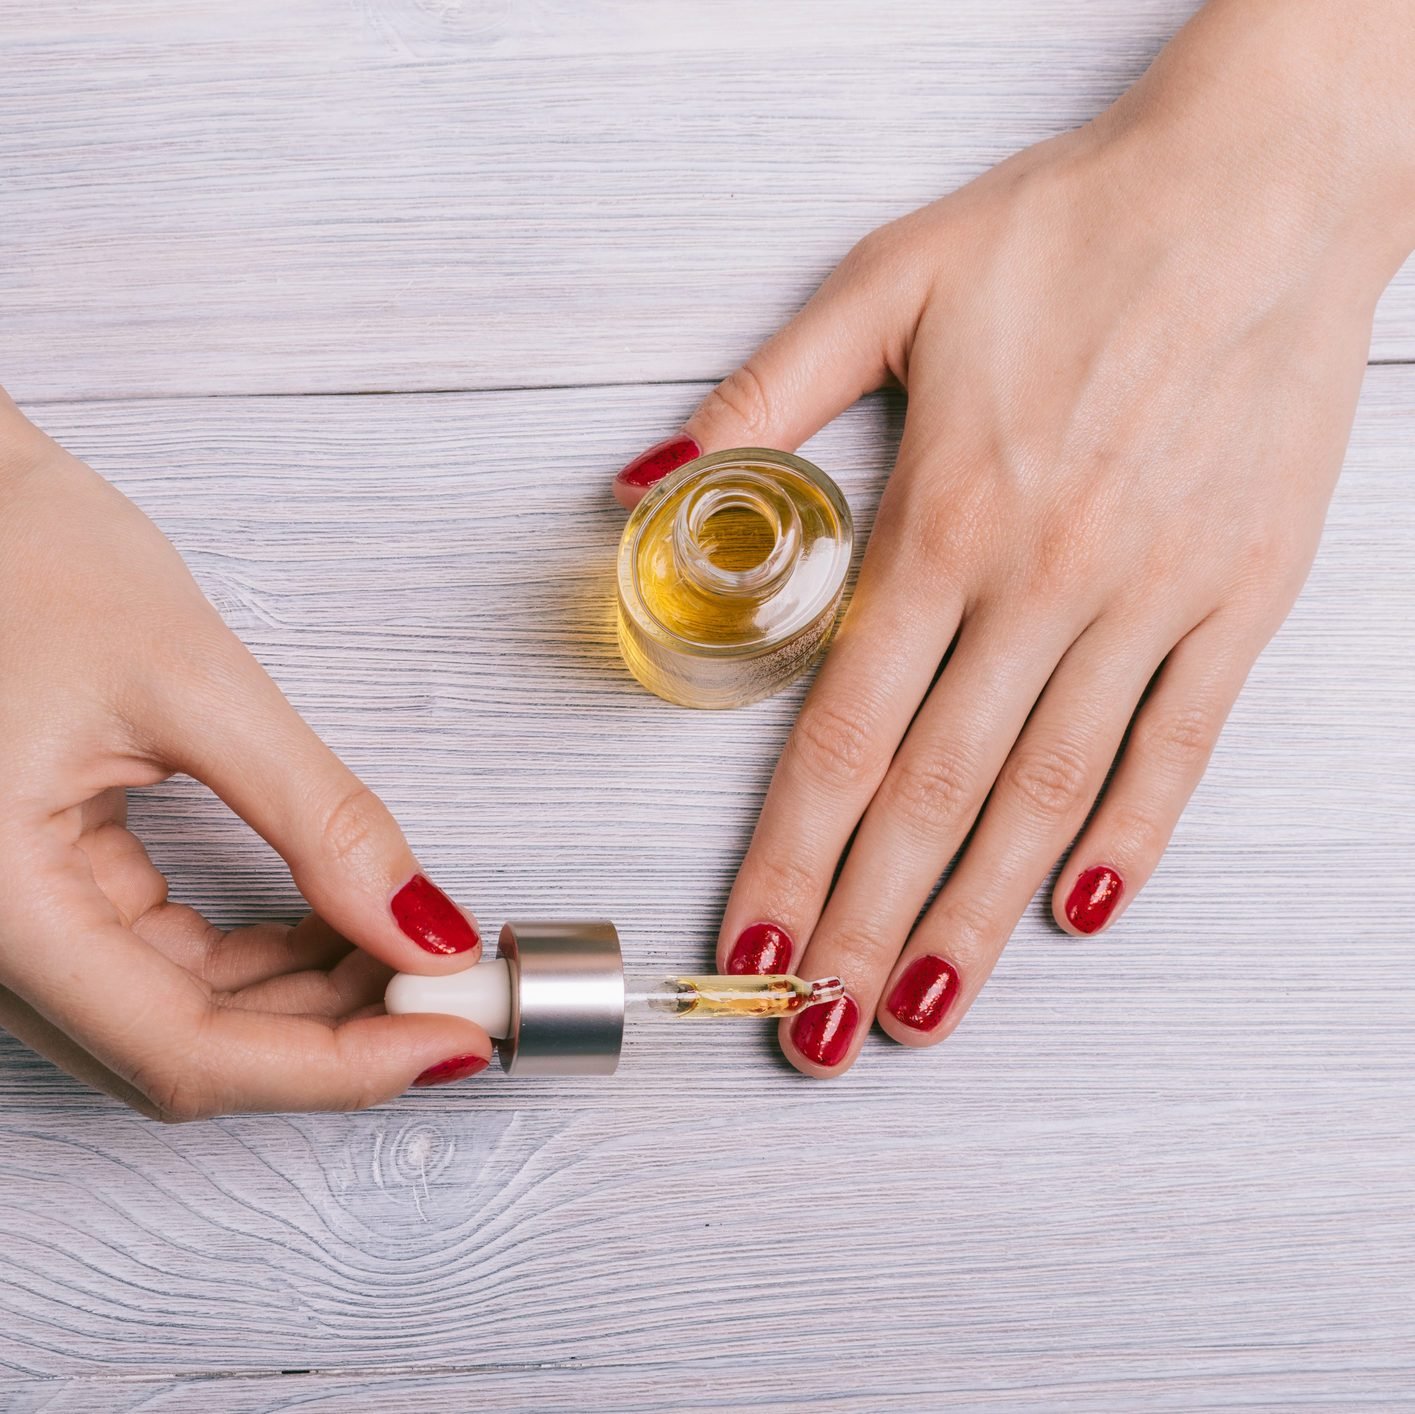 Female hand applied oil on the nails